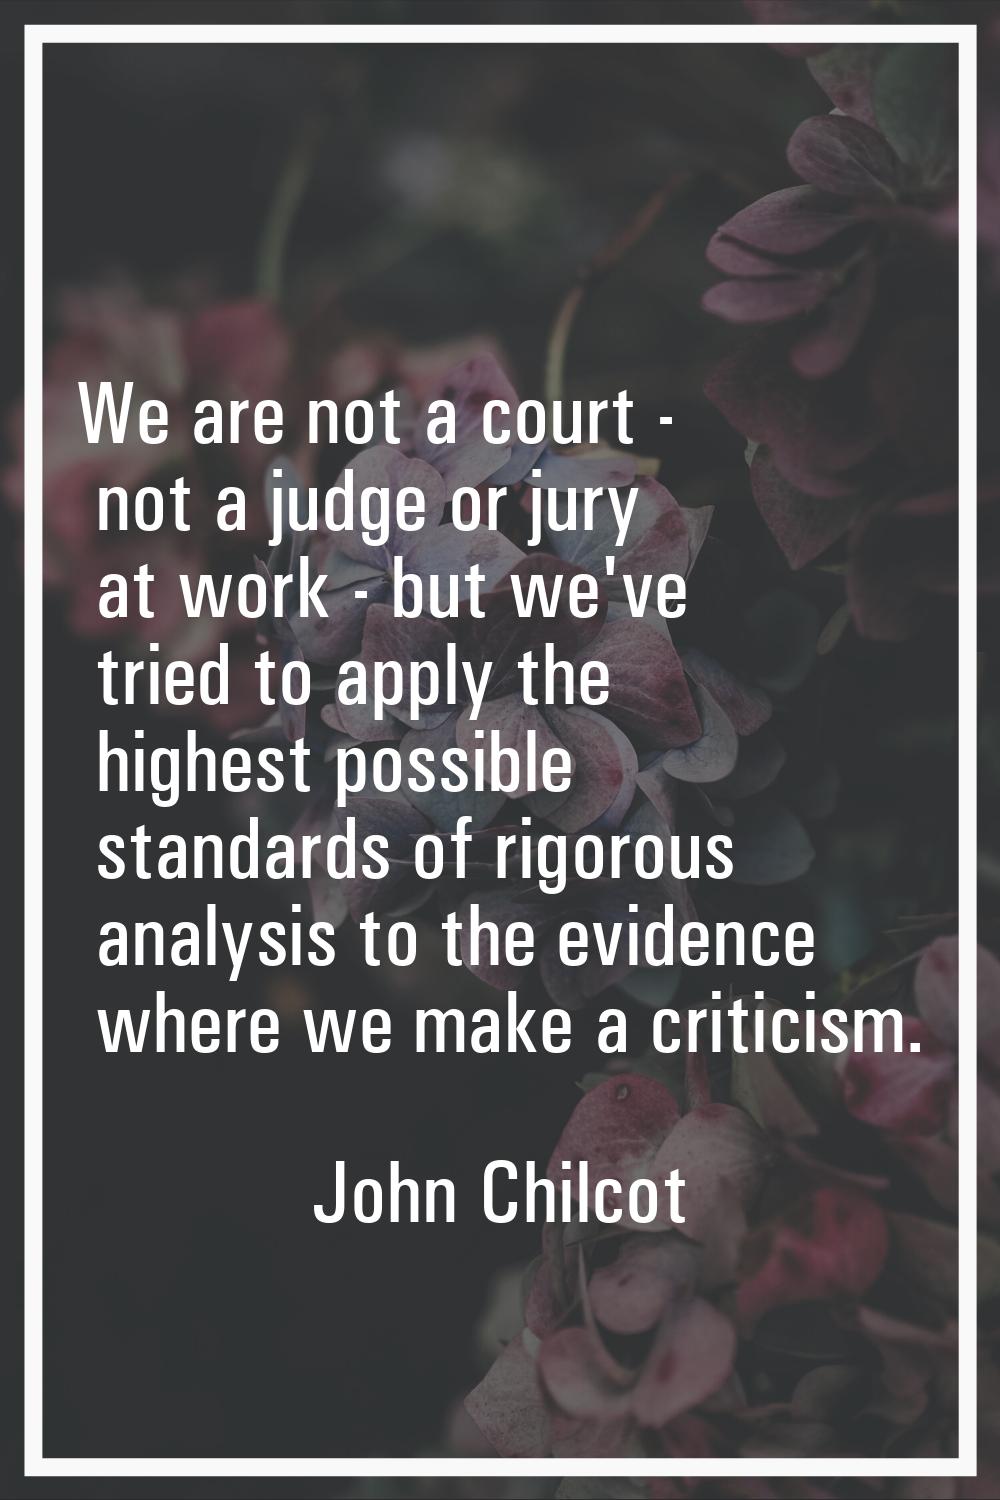 We are not a court - not a judge or jury at work - but we've tried to apply the highest possible st